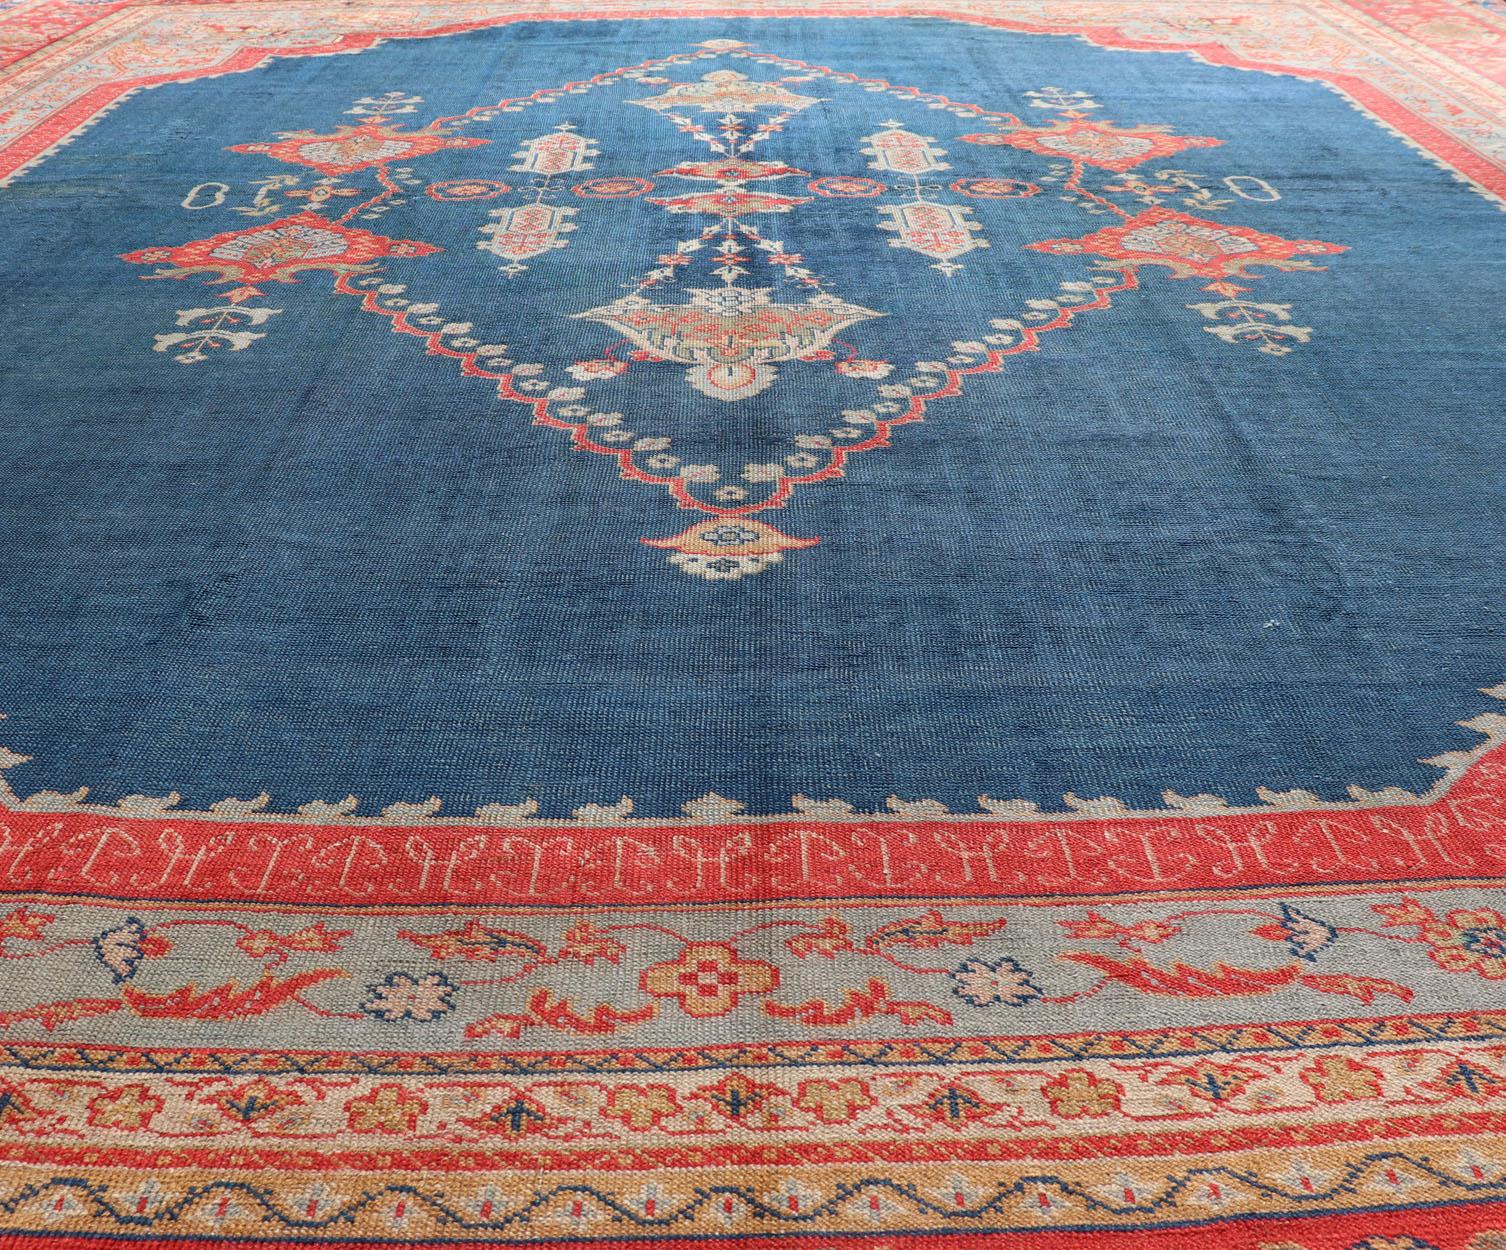 Large Antique Turkish Oushak Rug in Blue and Red with Ornate Medallion Design For Sale 3